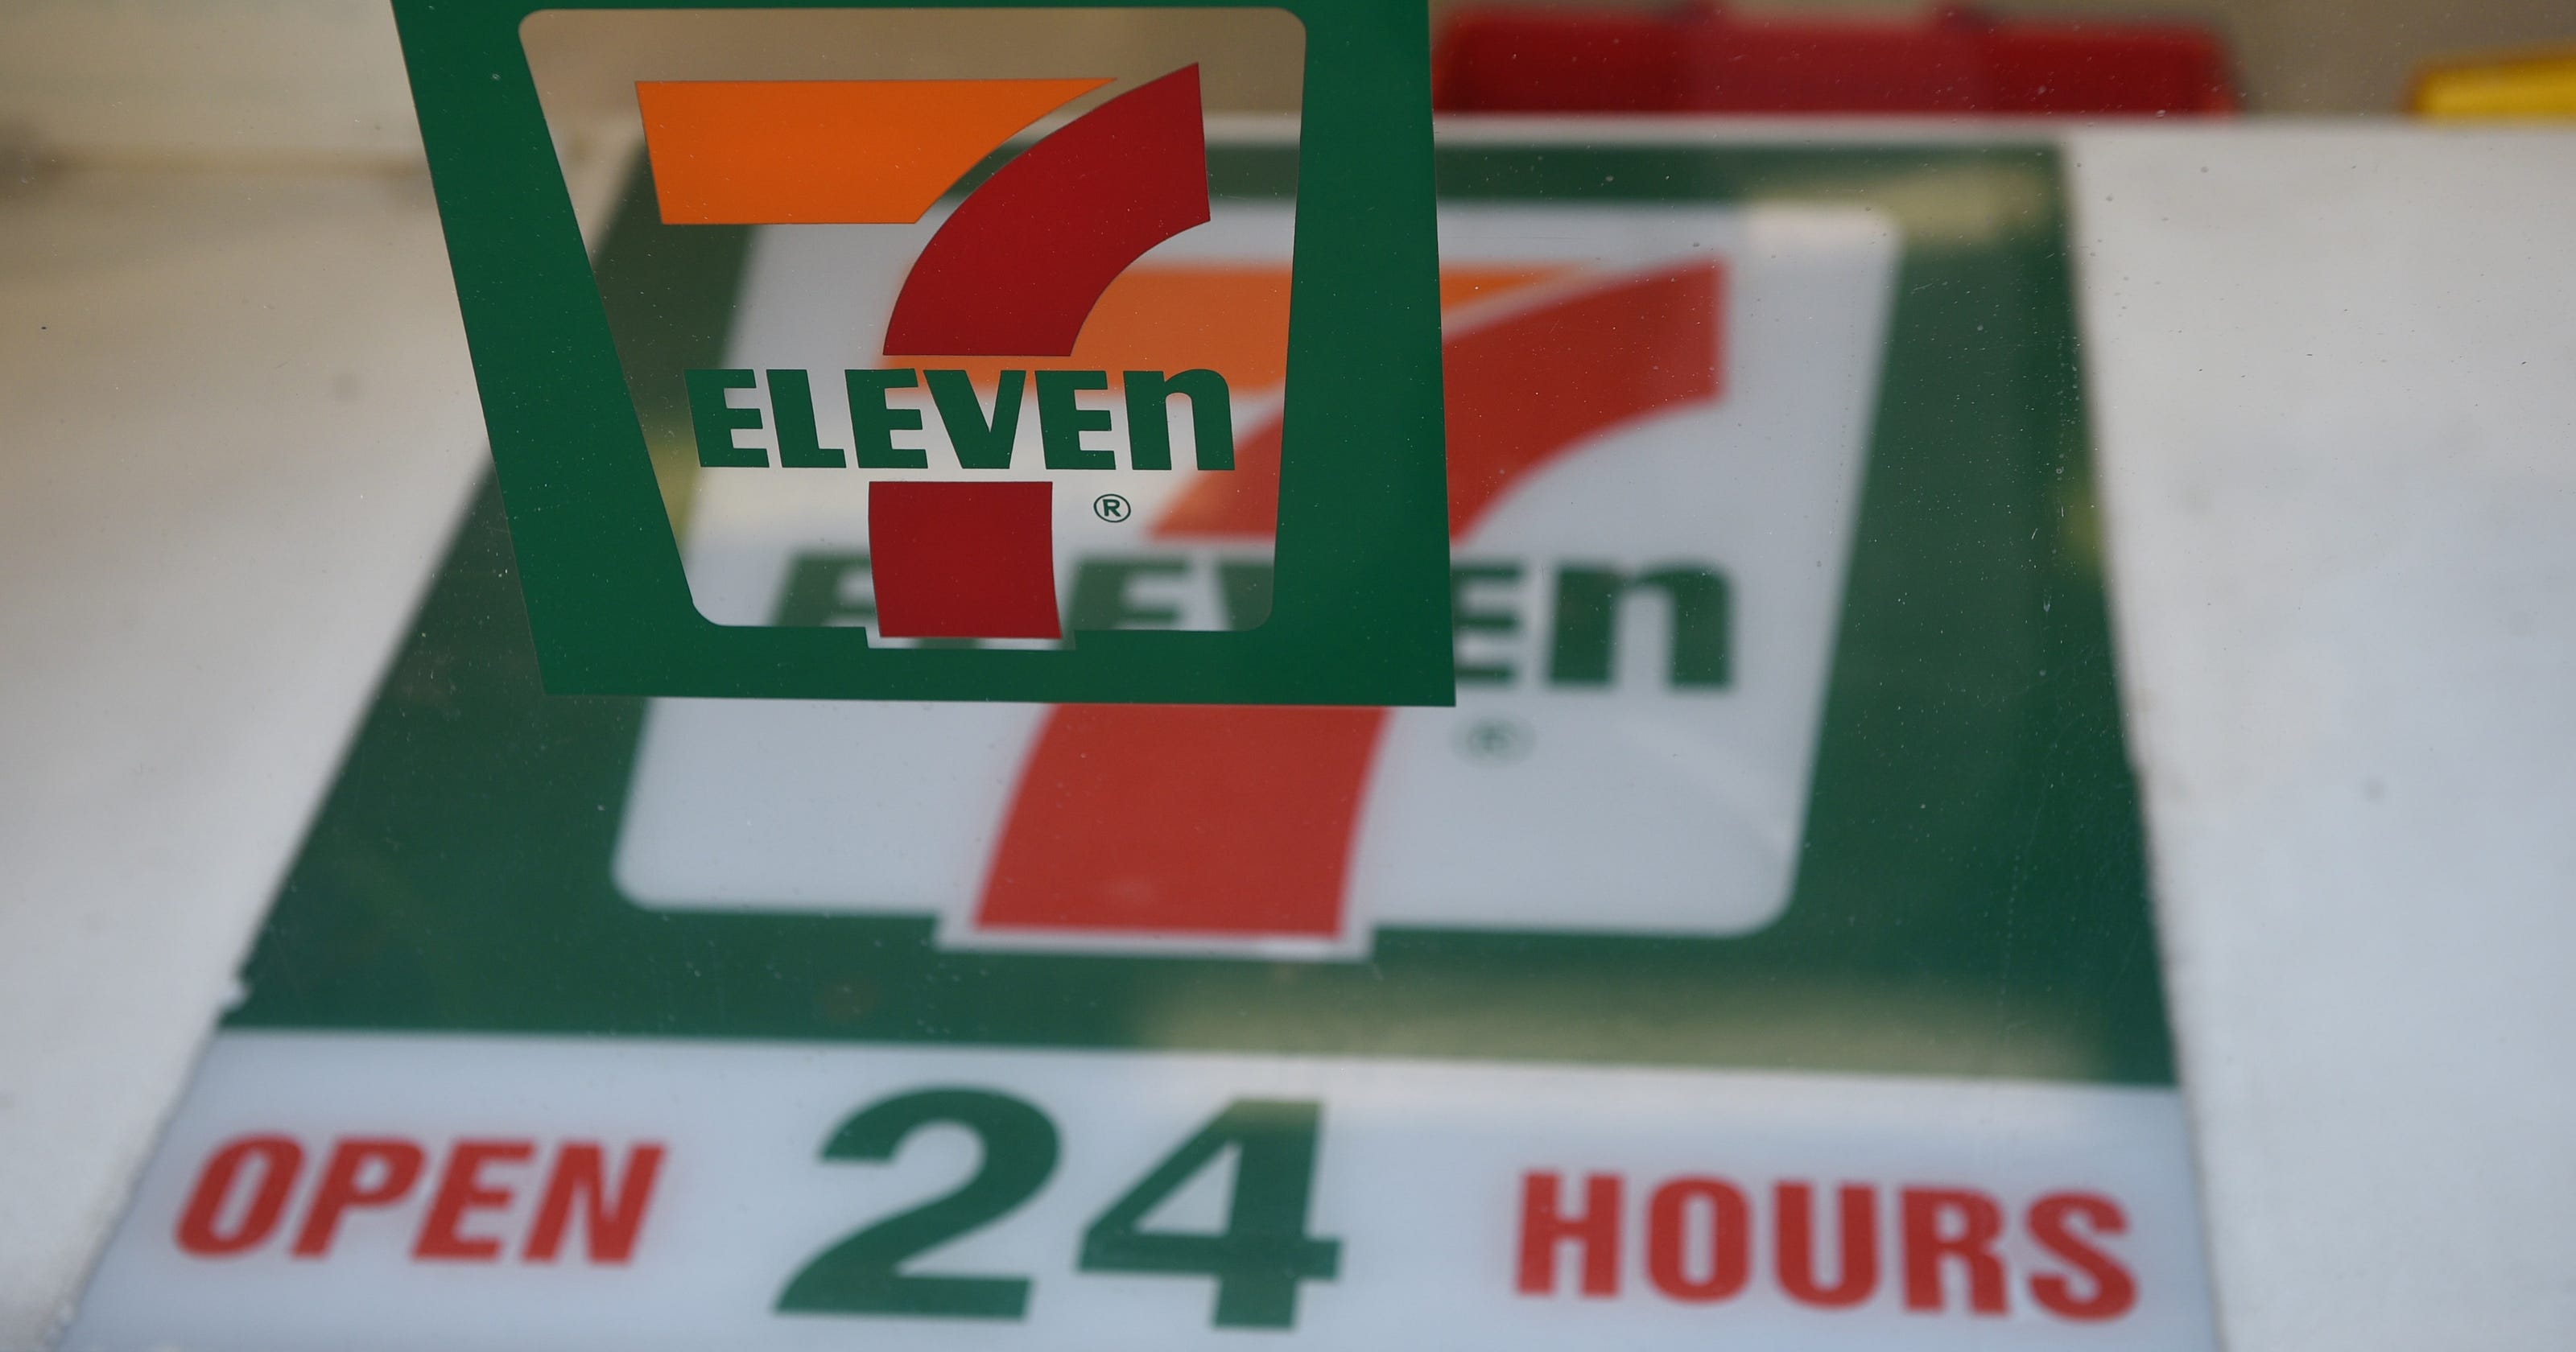 7-Eleven to launch scan-and-go at 14 Dallas stores3200 x 1680